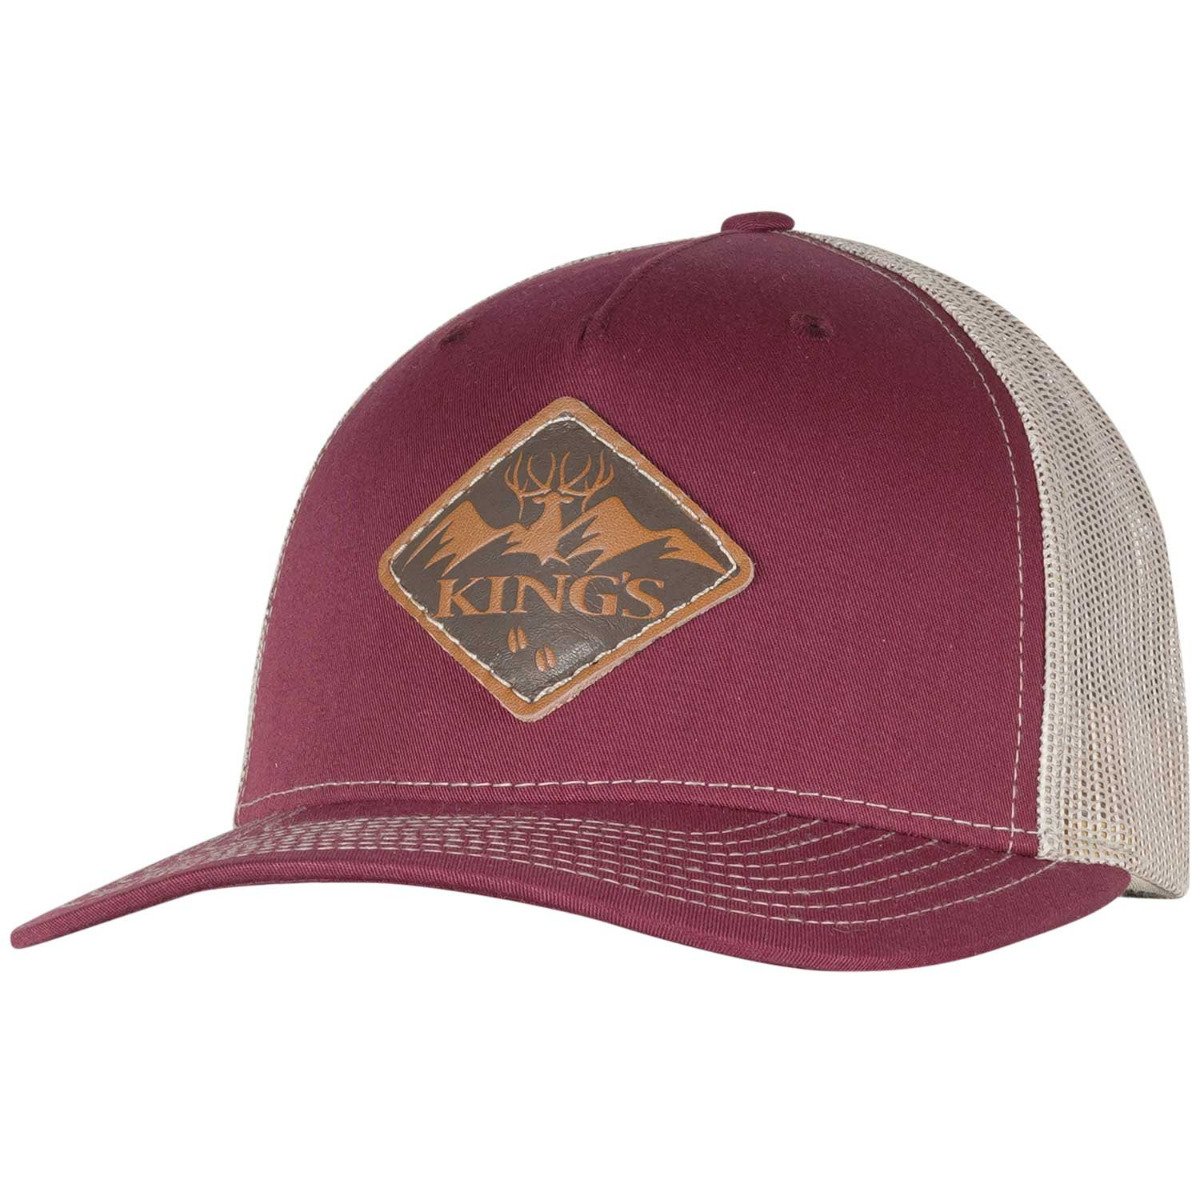 King's Camo Leather Patch Hat